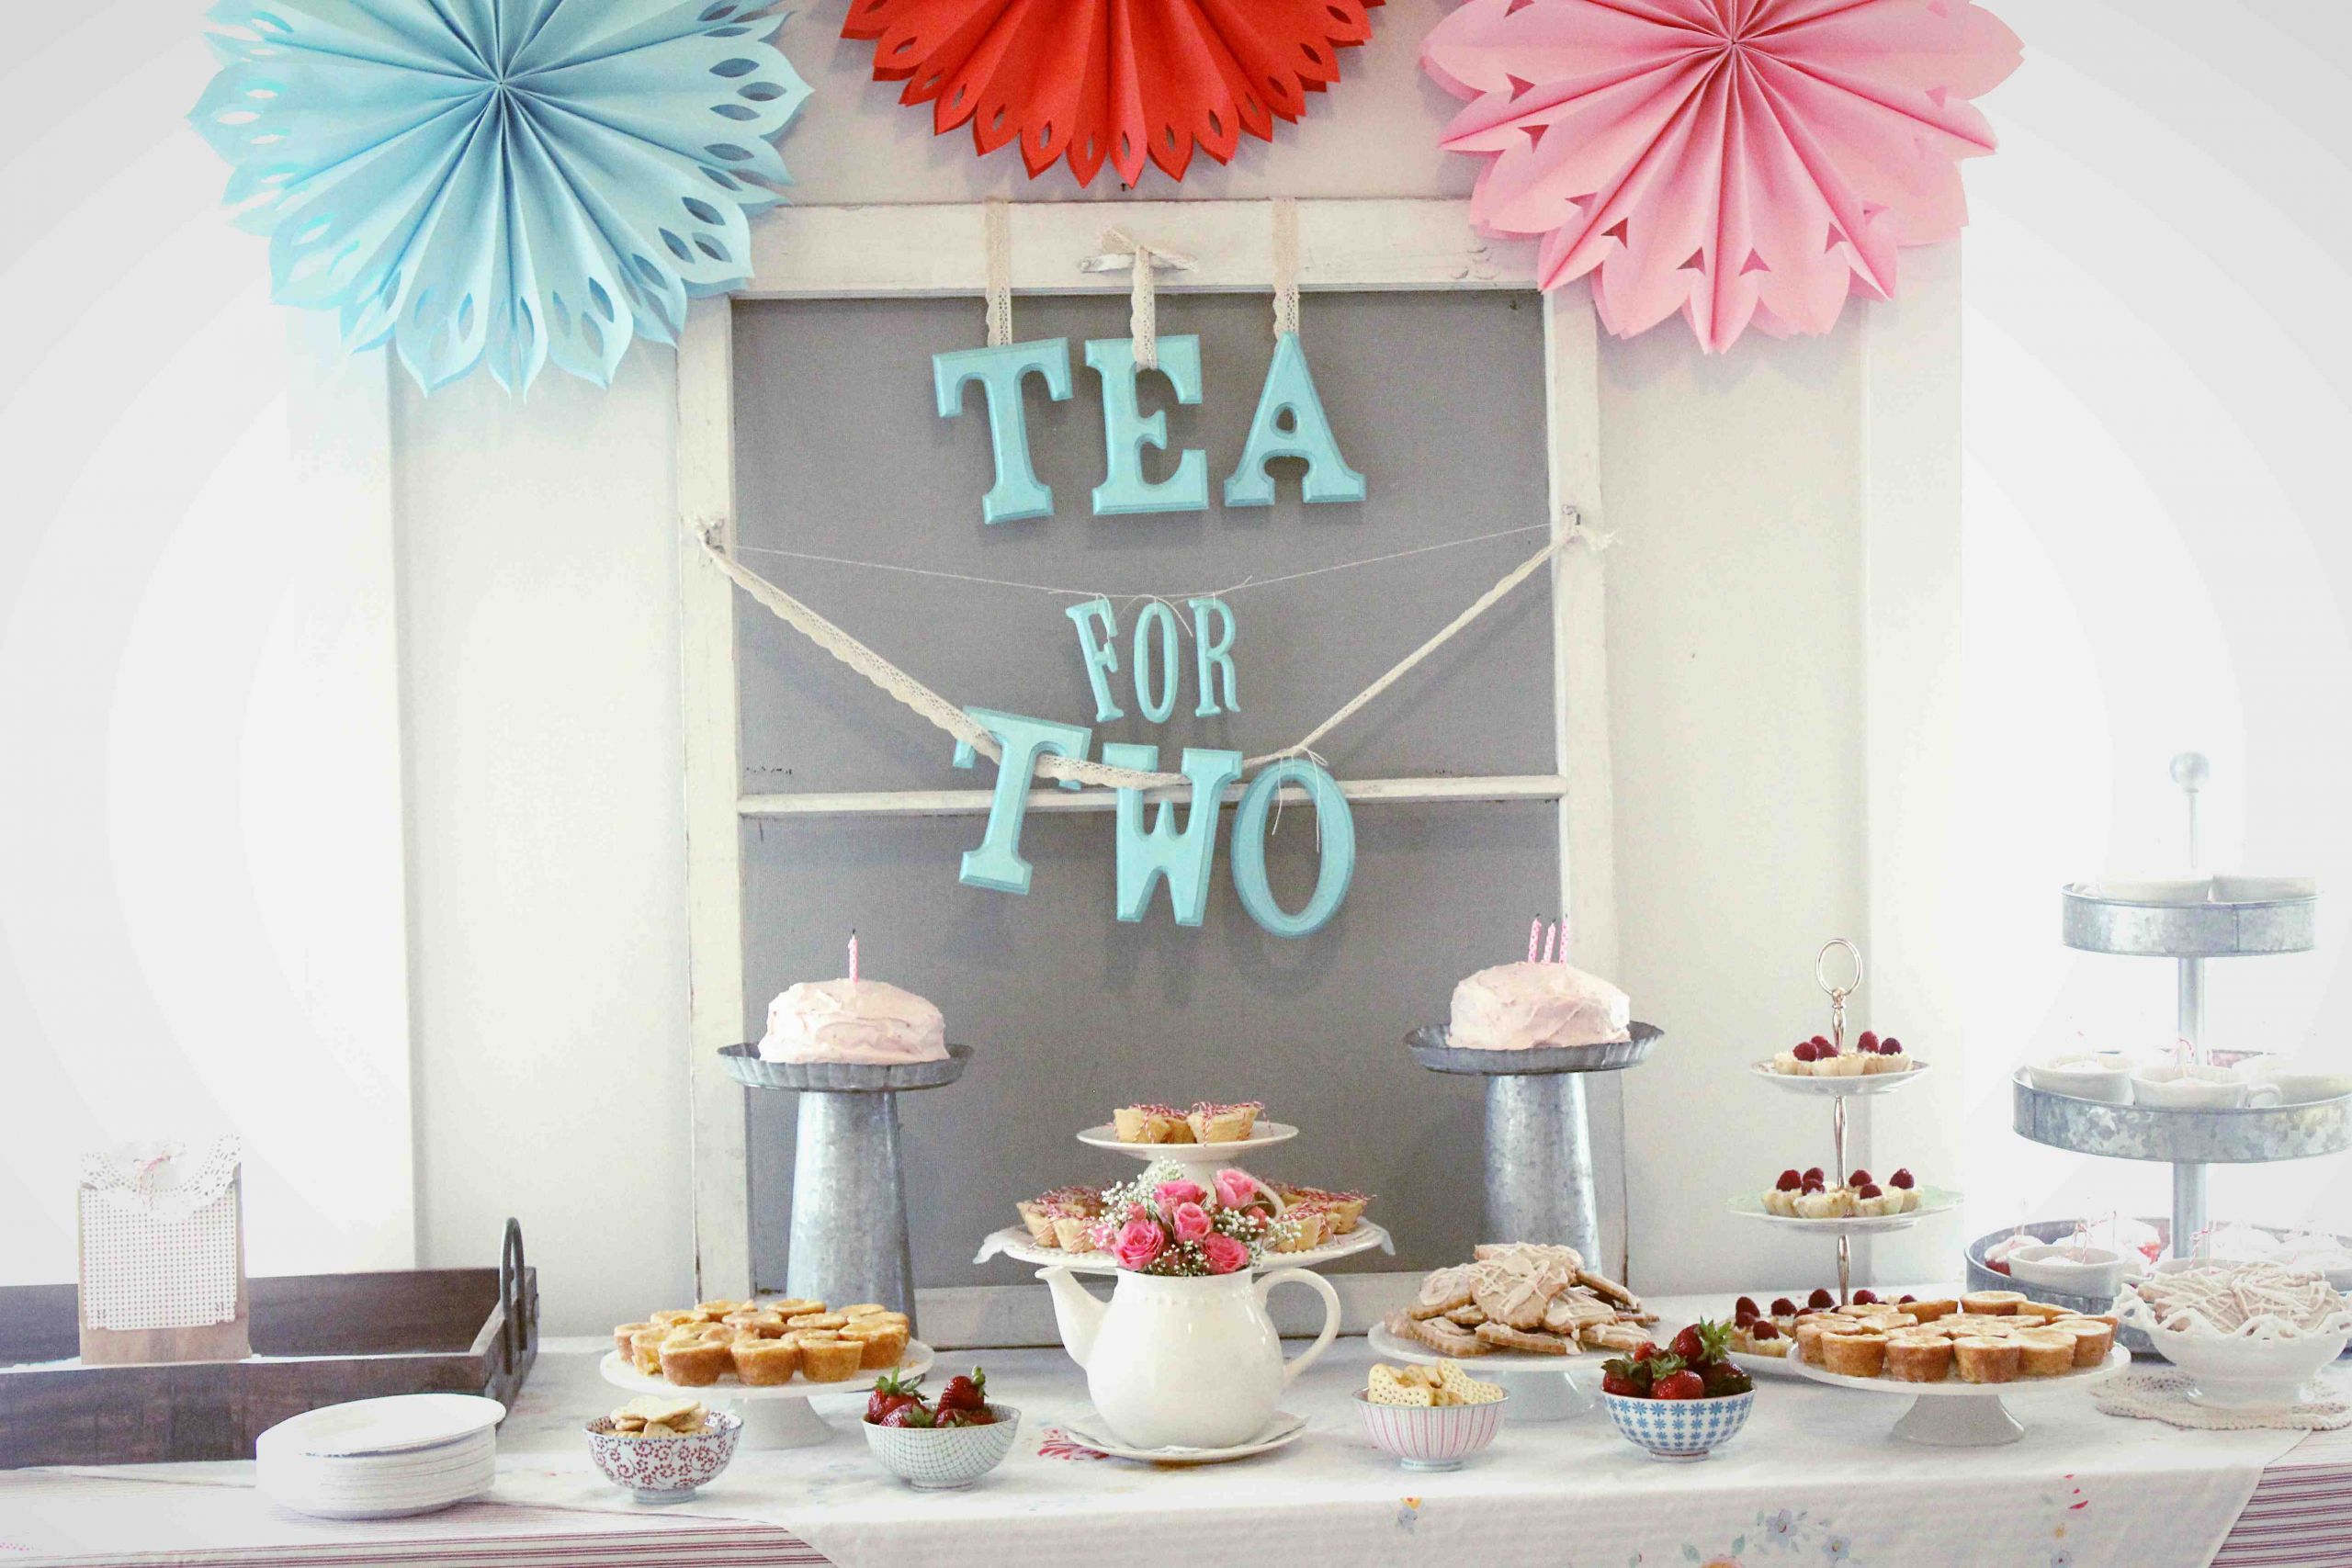 Tea For Two Party Ideas
 A “Tea For Two” Birthday Party